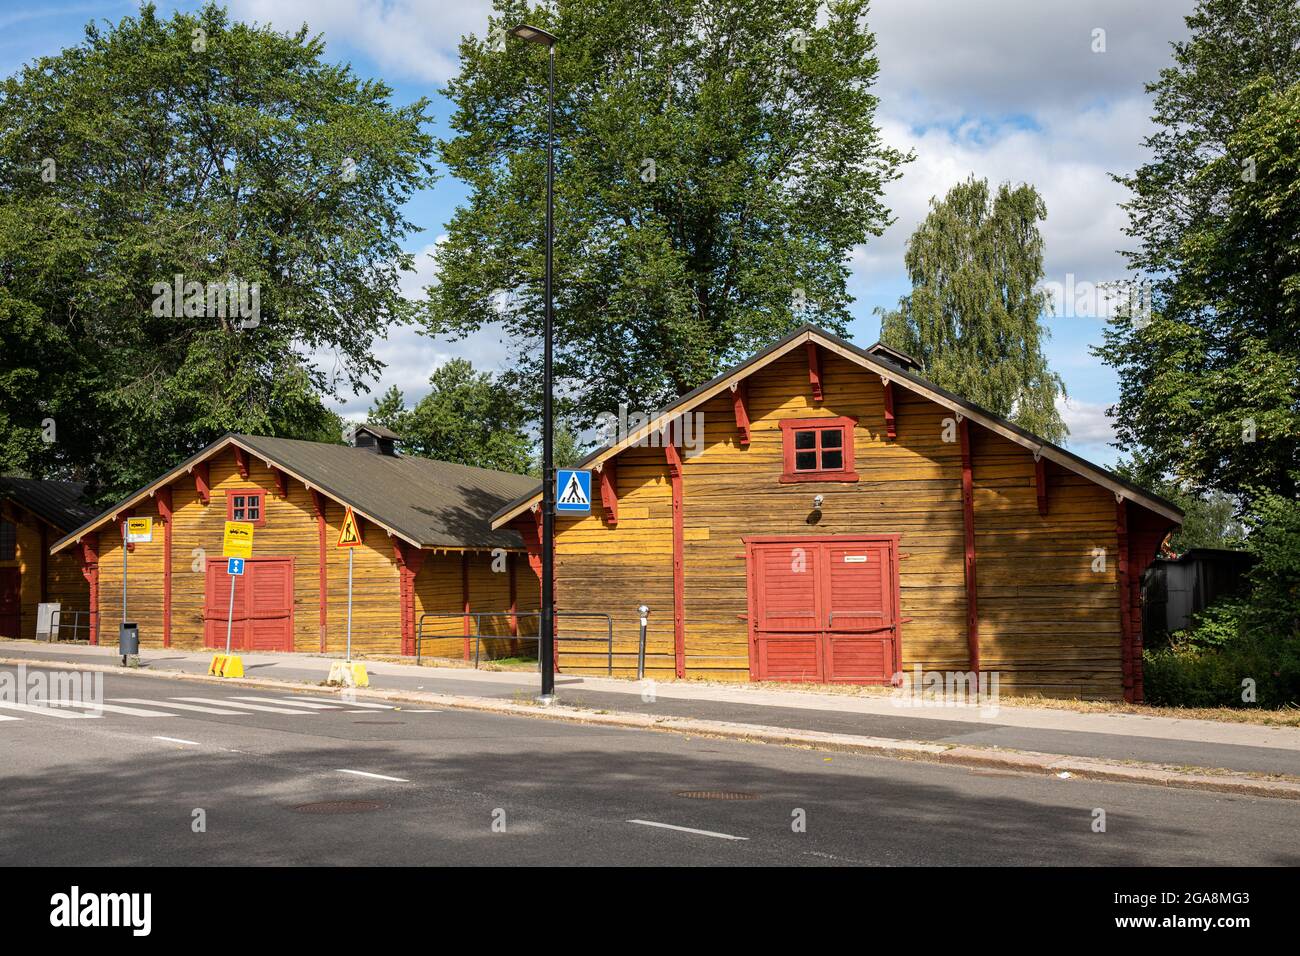 Old yellow wooden roadside warehouses or storages in Turku, Finland Stock Photo